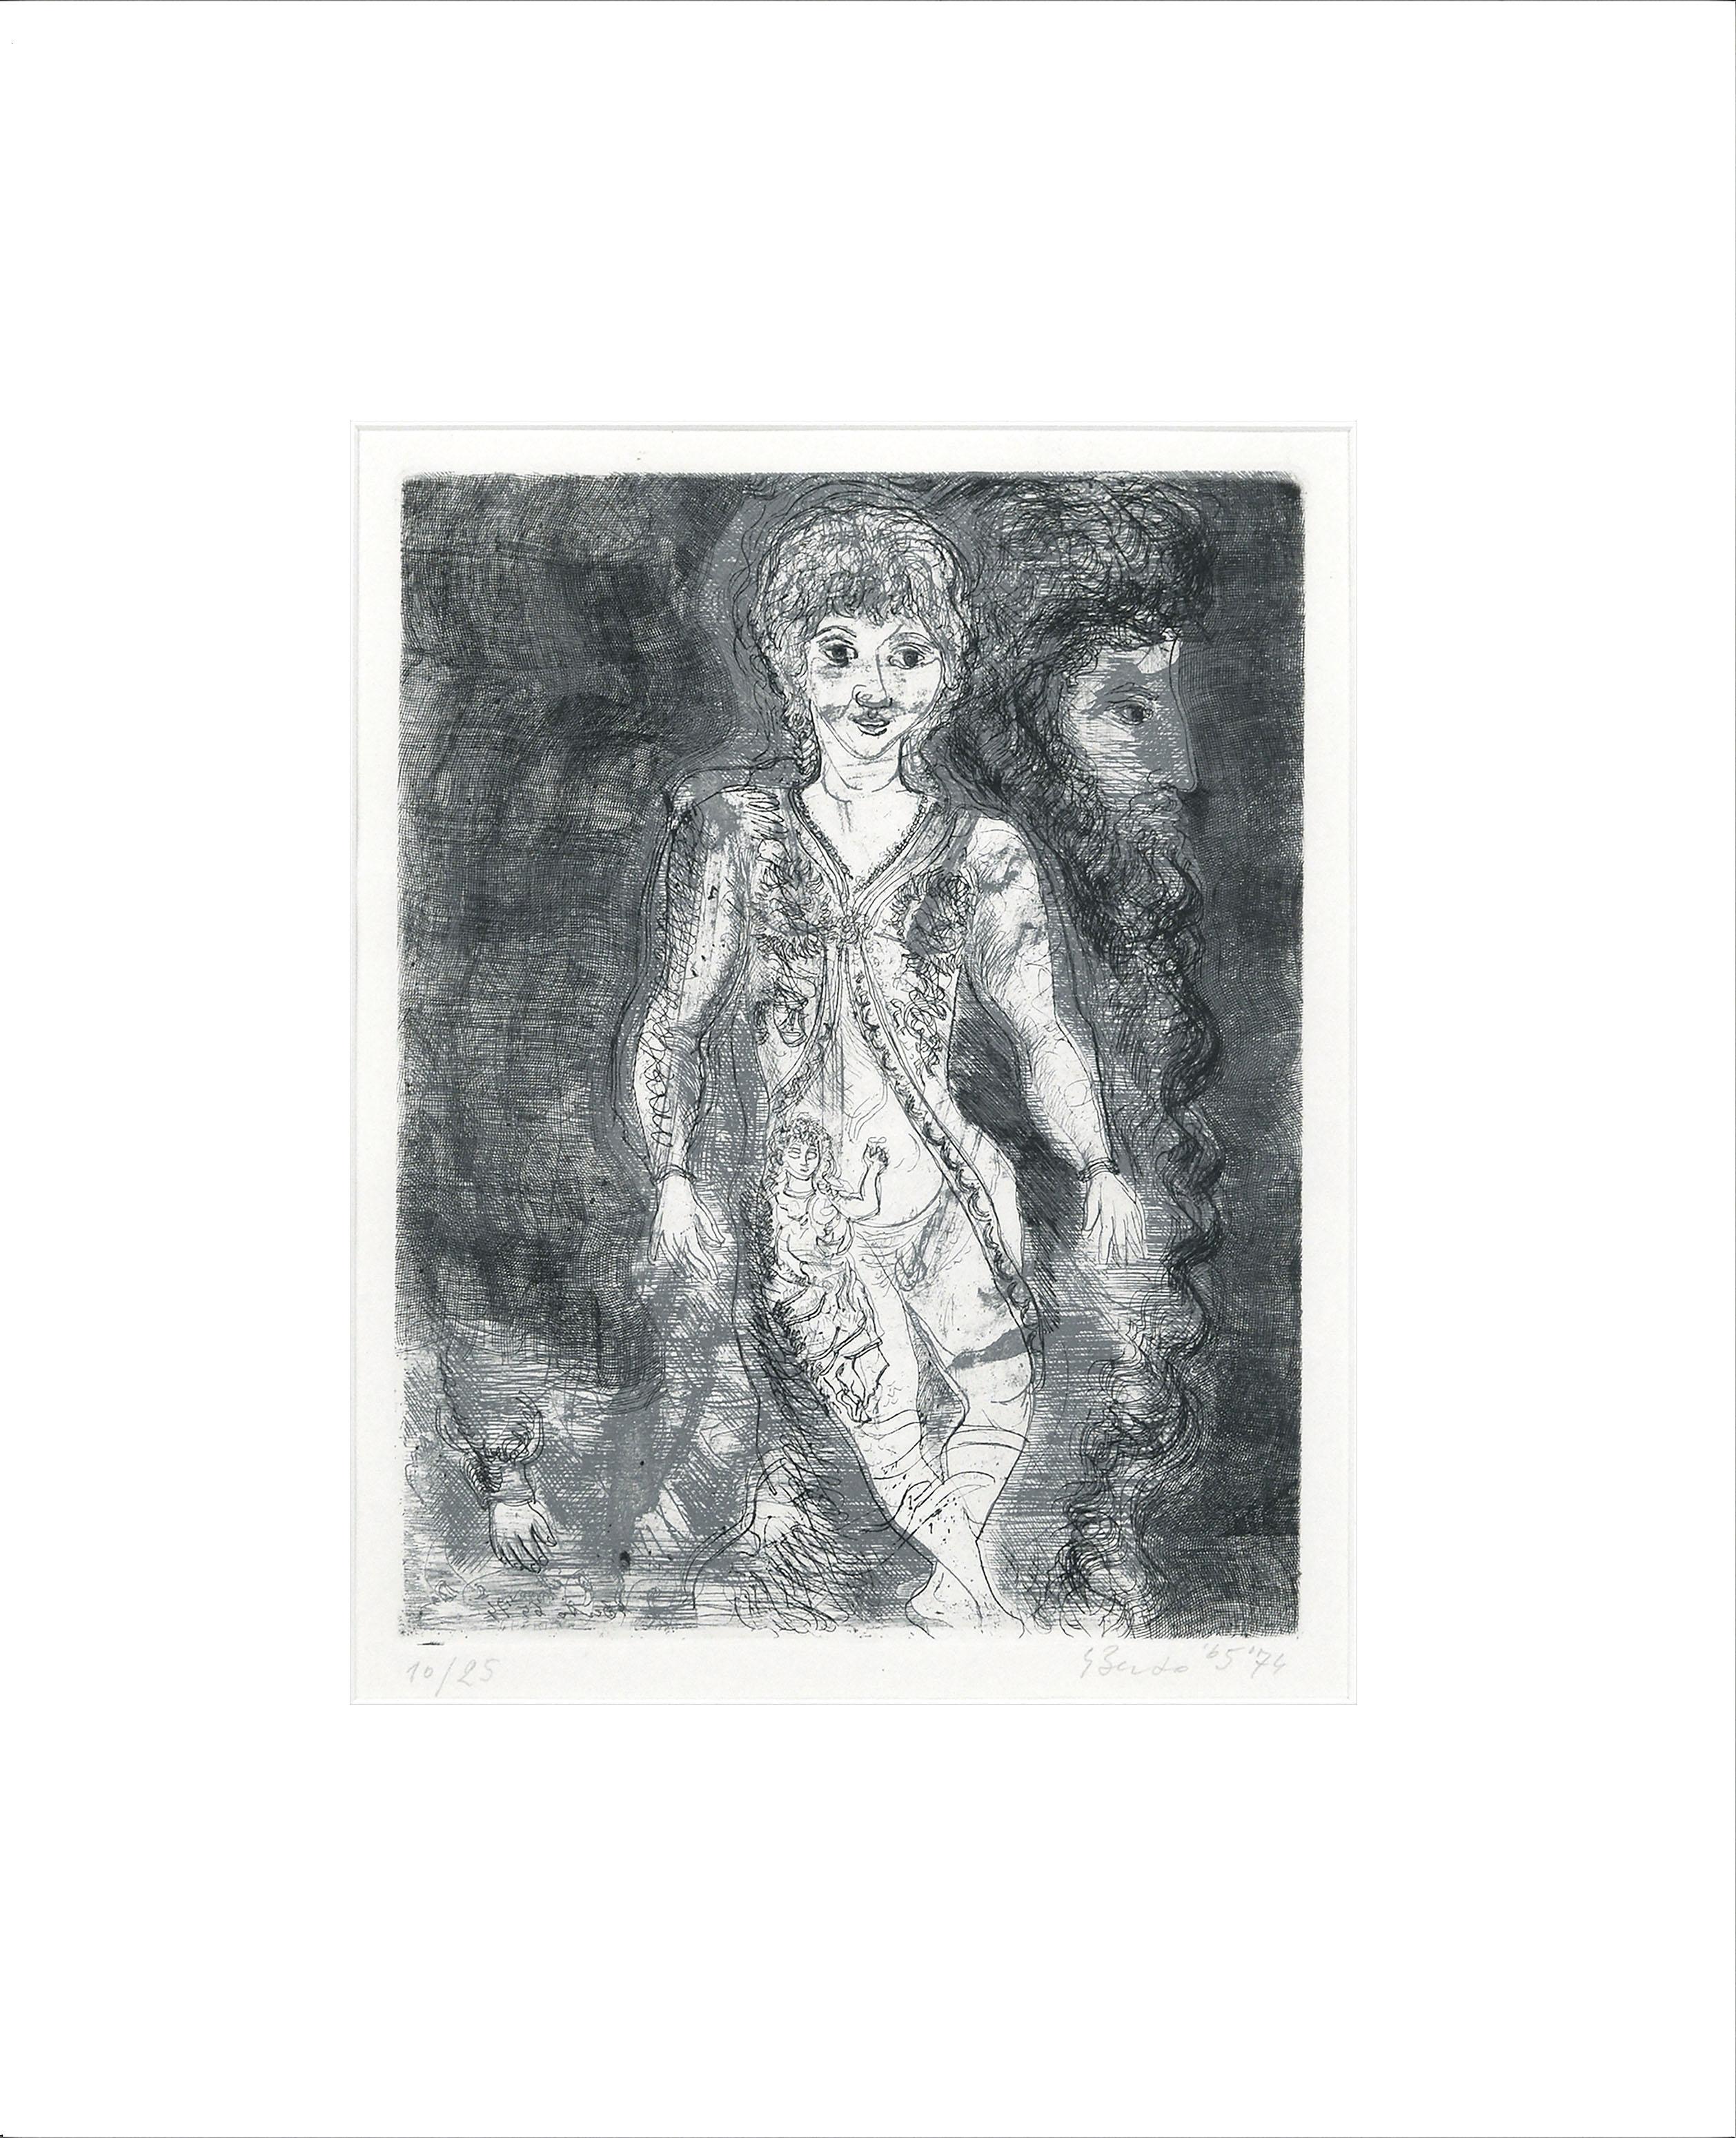 Mid Century Modern Figurative Etching of a Man & Woman, Signed Limited Edition - Print by Gianpaolo Berto